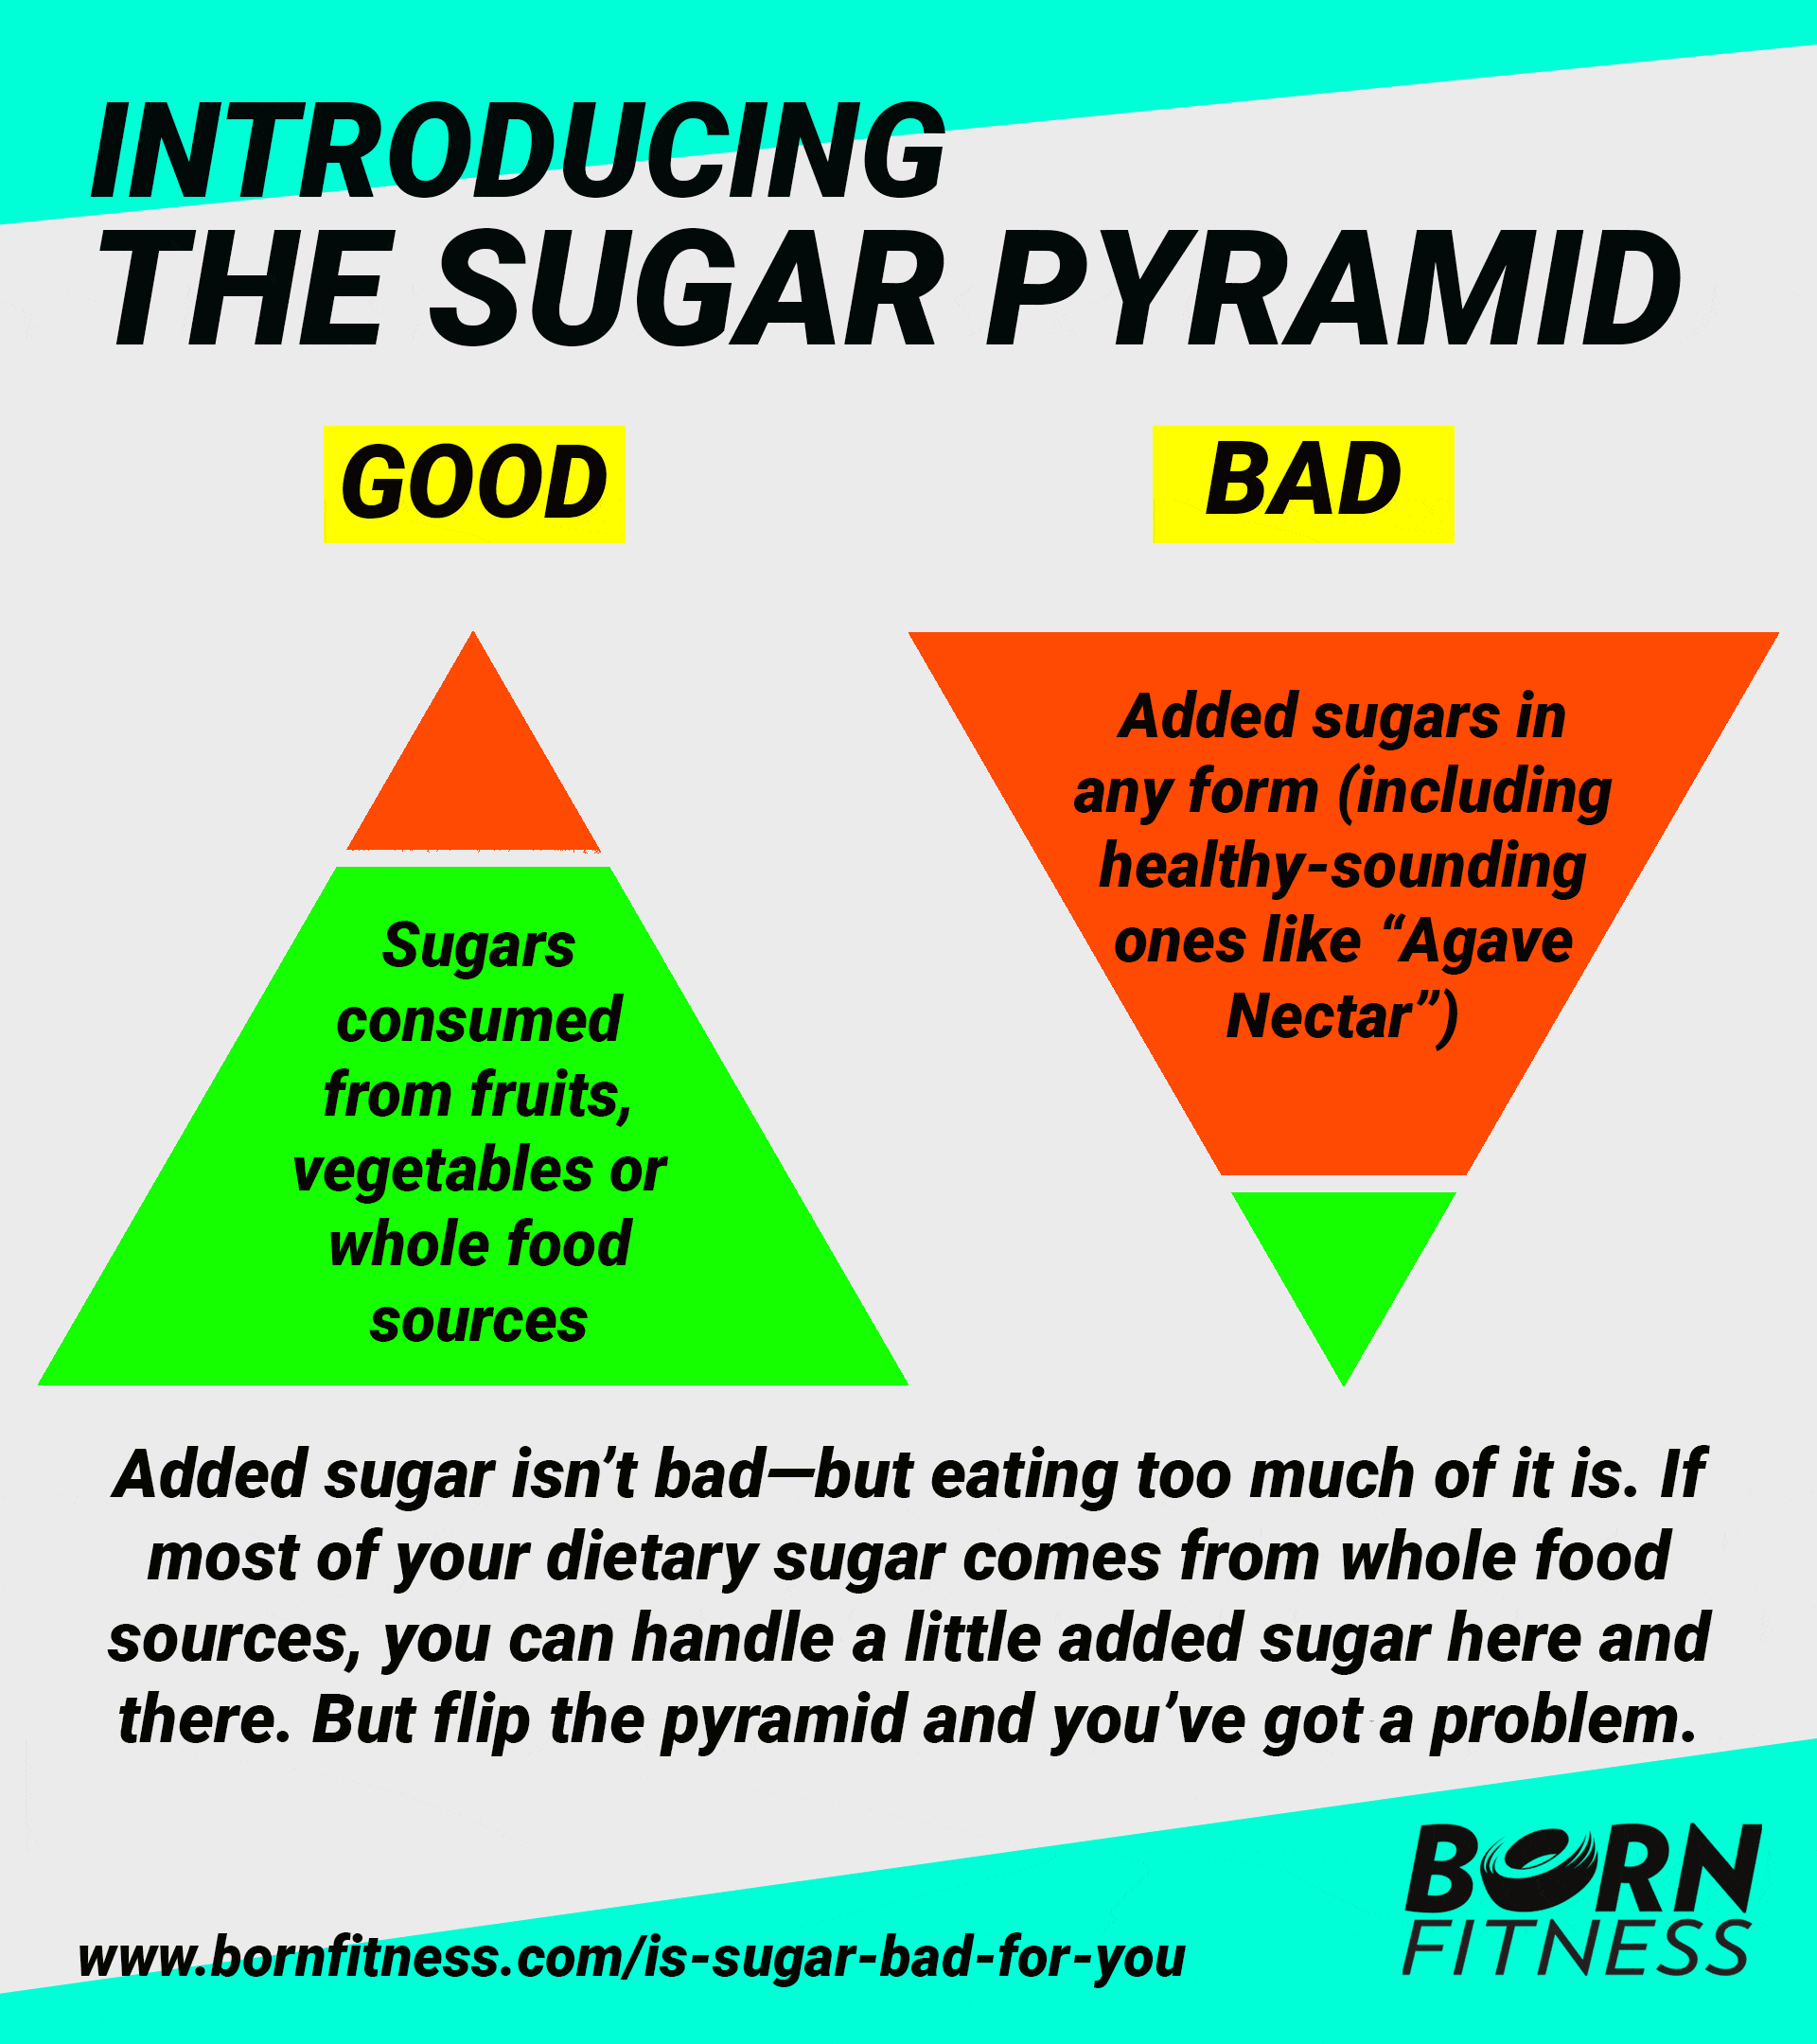 Two pyramids compare healthy vs. unhealthy intakes of added sugar. Healthy has more natural sugars than added, while the reverse is true for unhealthy. 